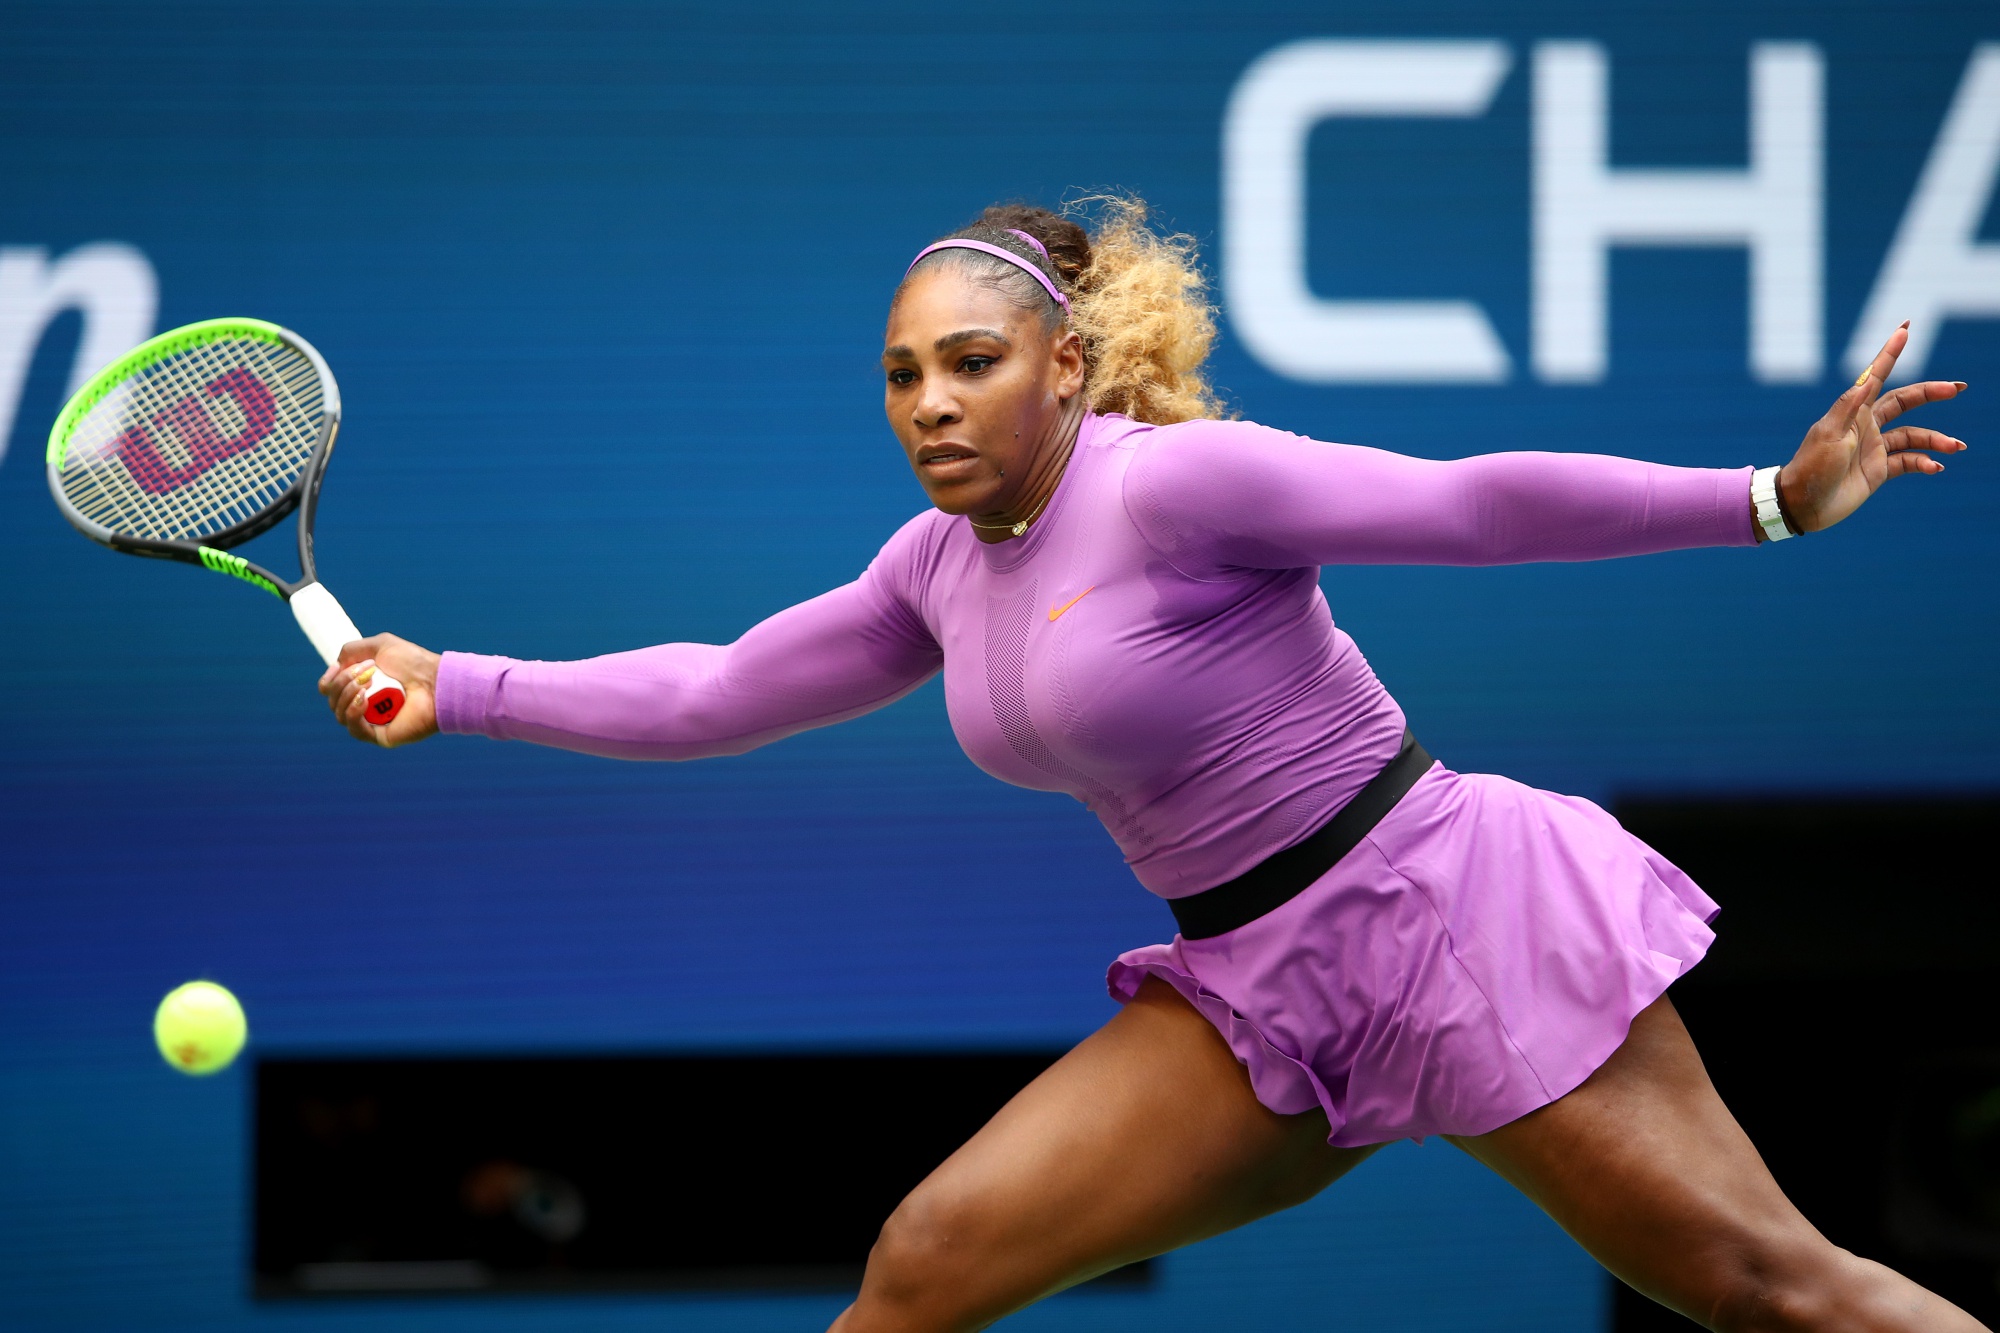 Serena Williams Tennis Retirement Could Boost ESPNs US Open Ratings